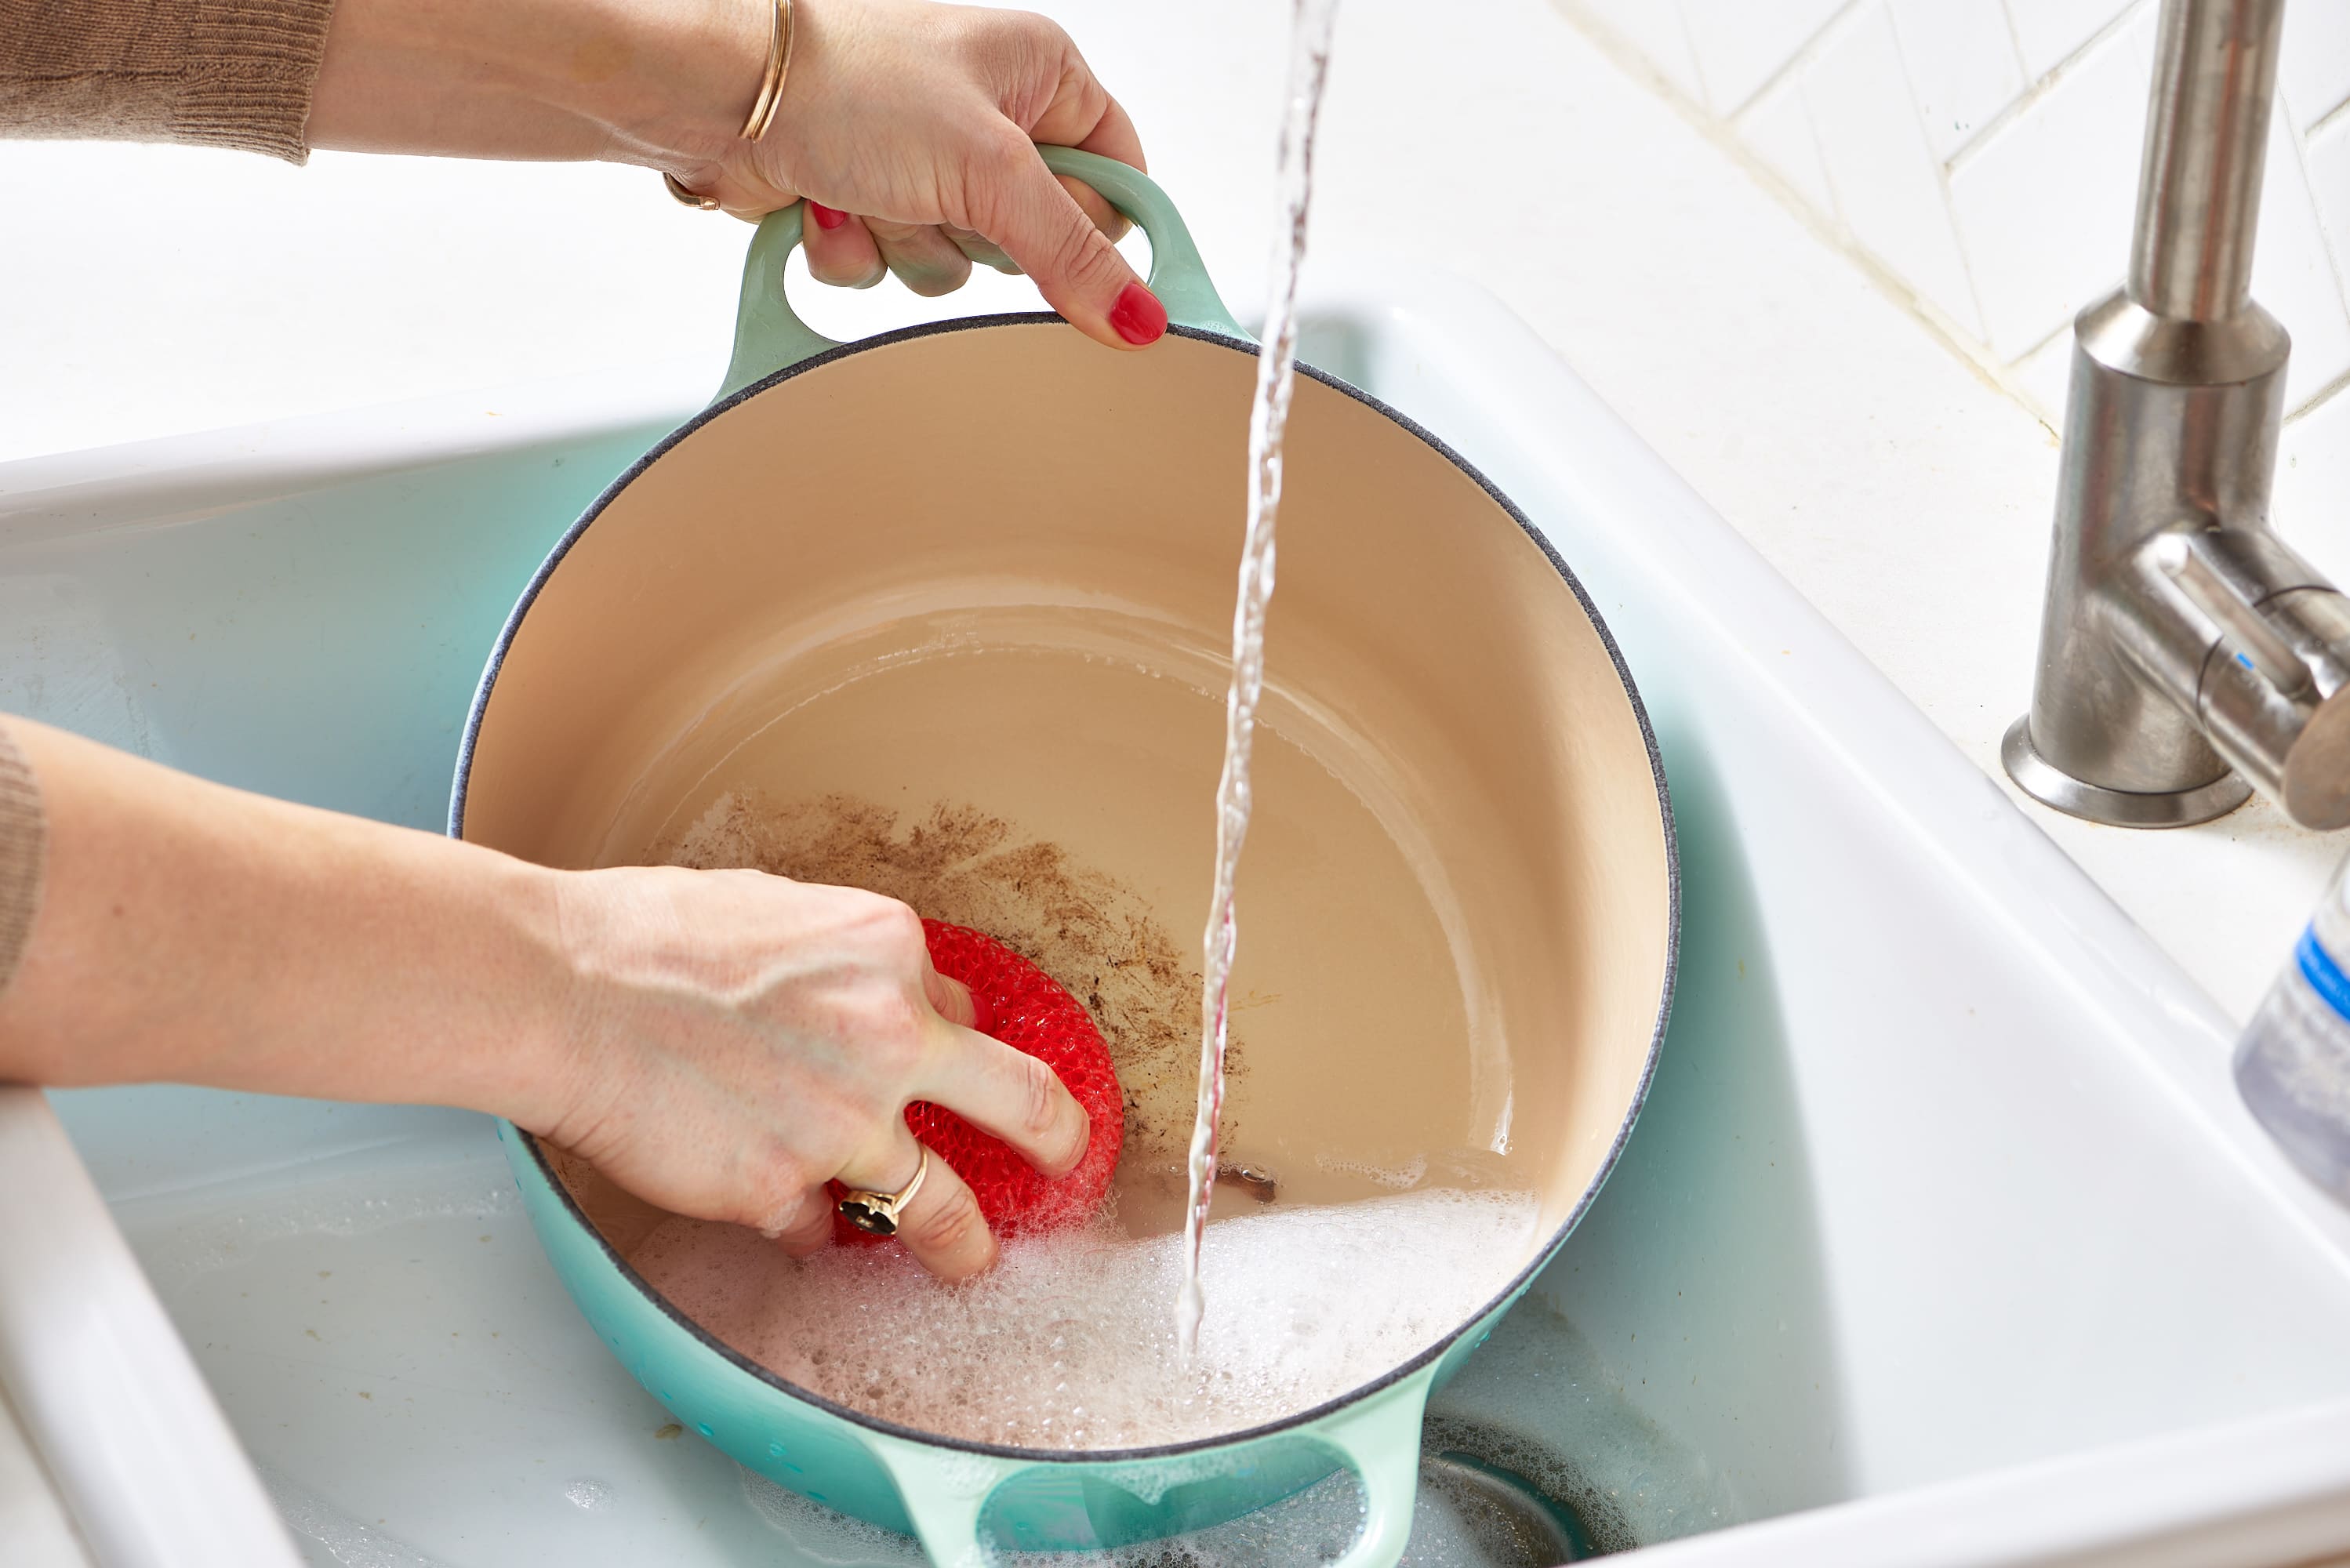 What Is the Correct Order to Wash Dishes by Hand 